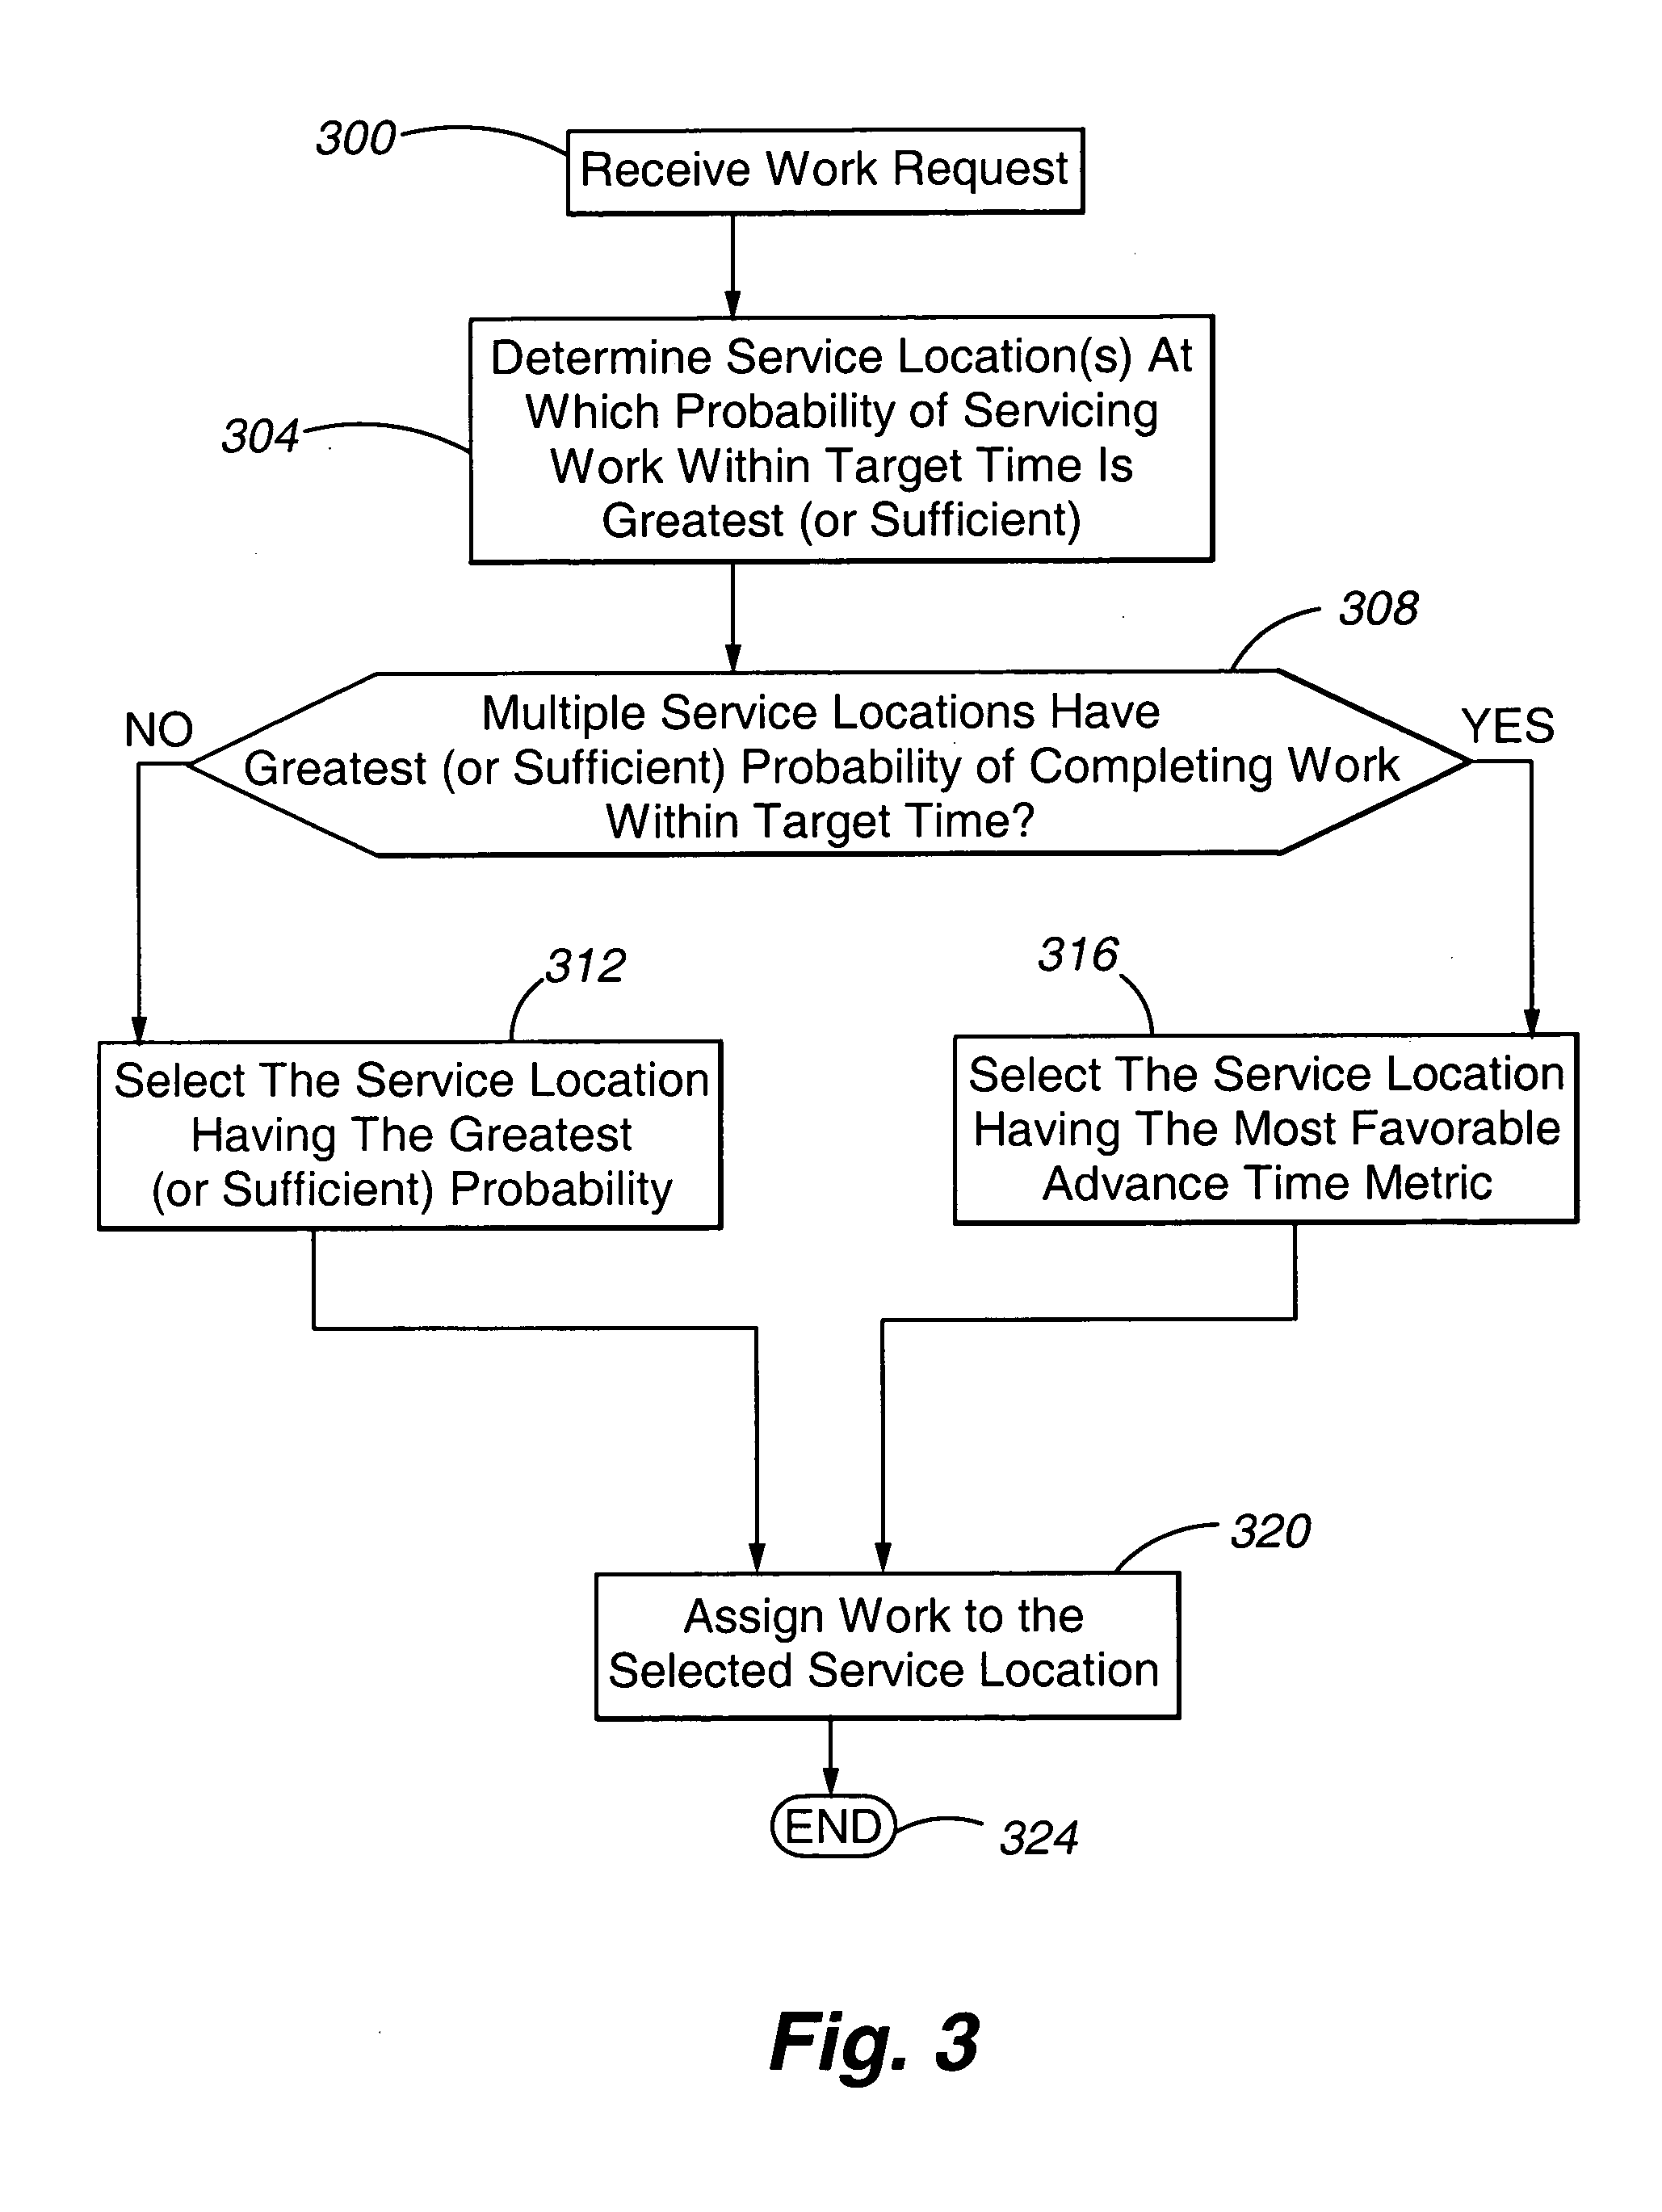 Method and apparatus for load balancing work on a network of servers based on the probability of being serviced within a service time goal